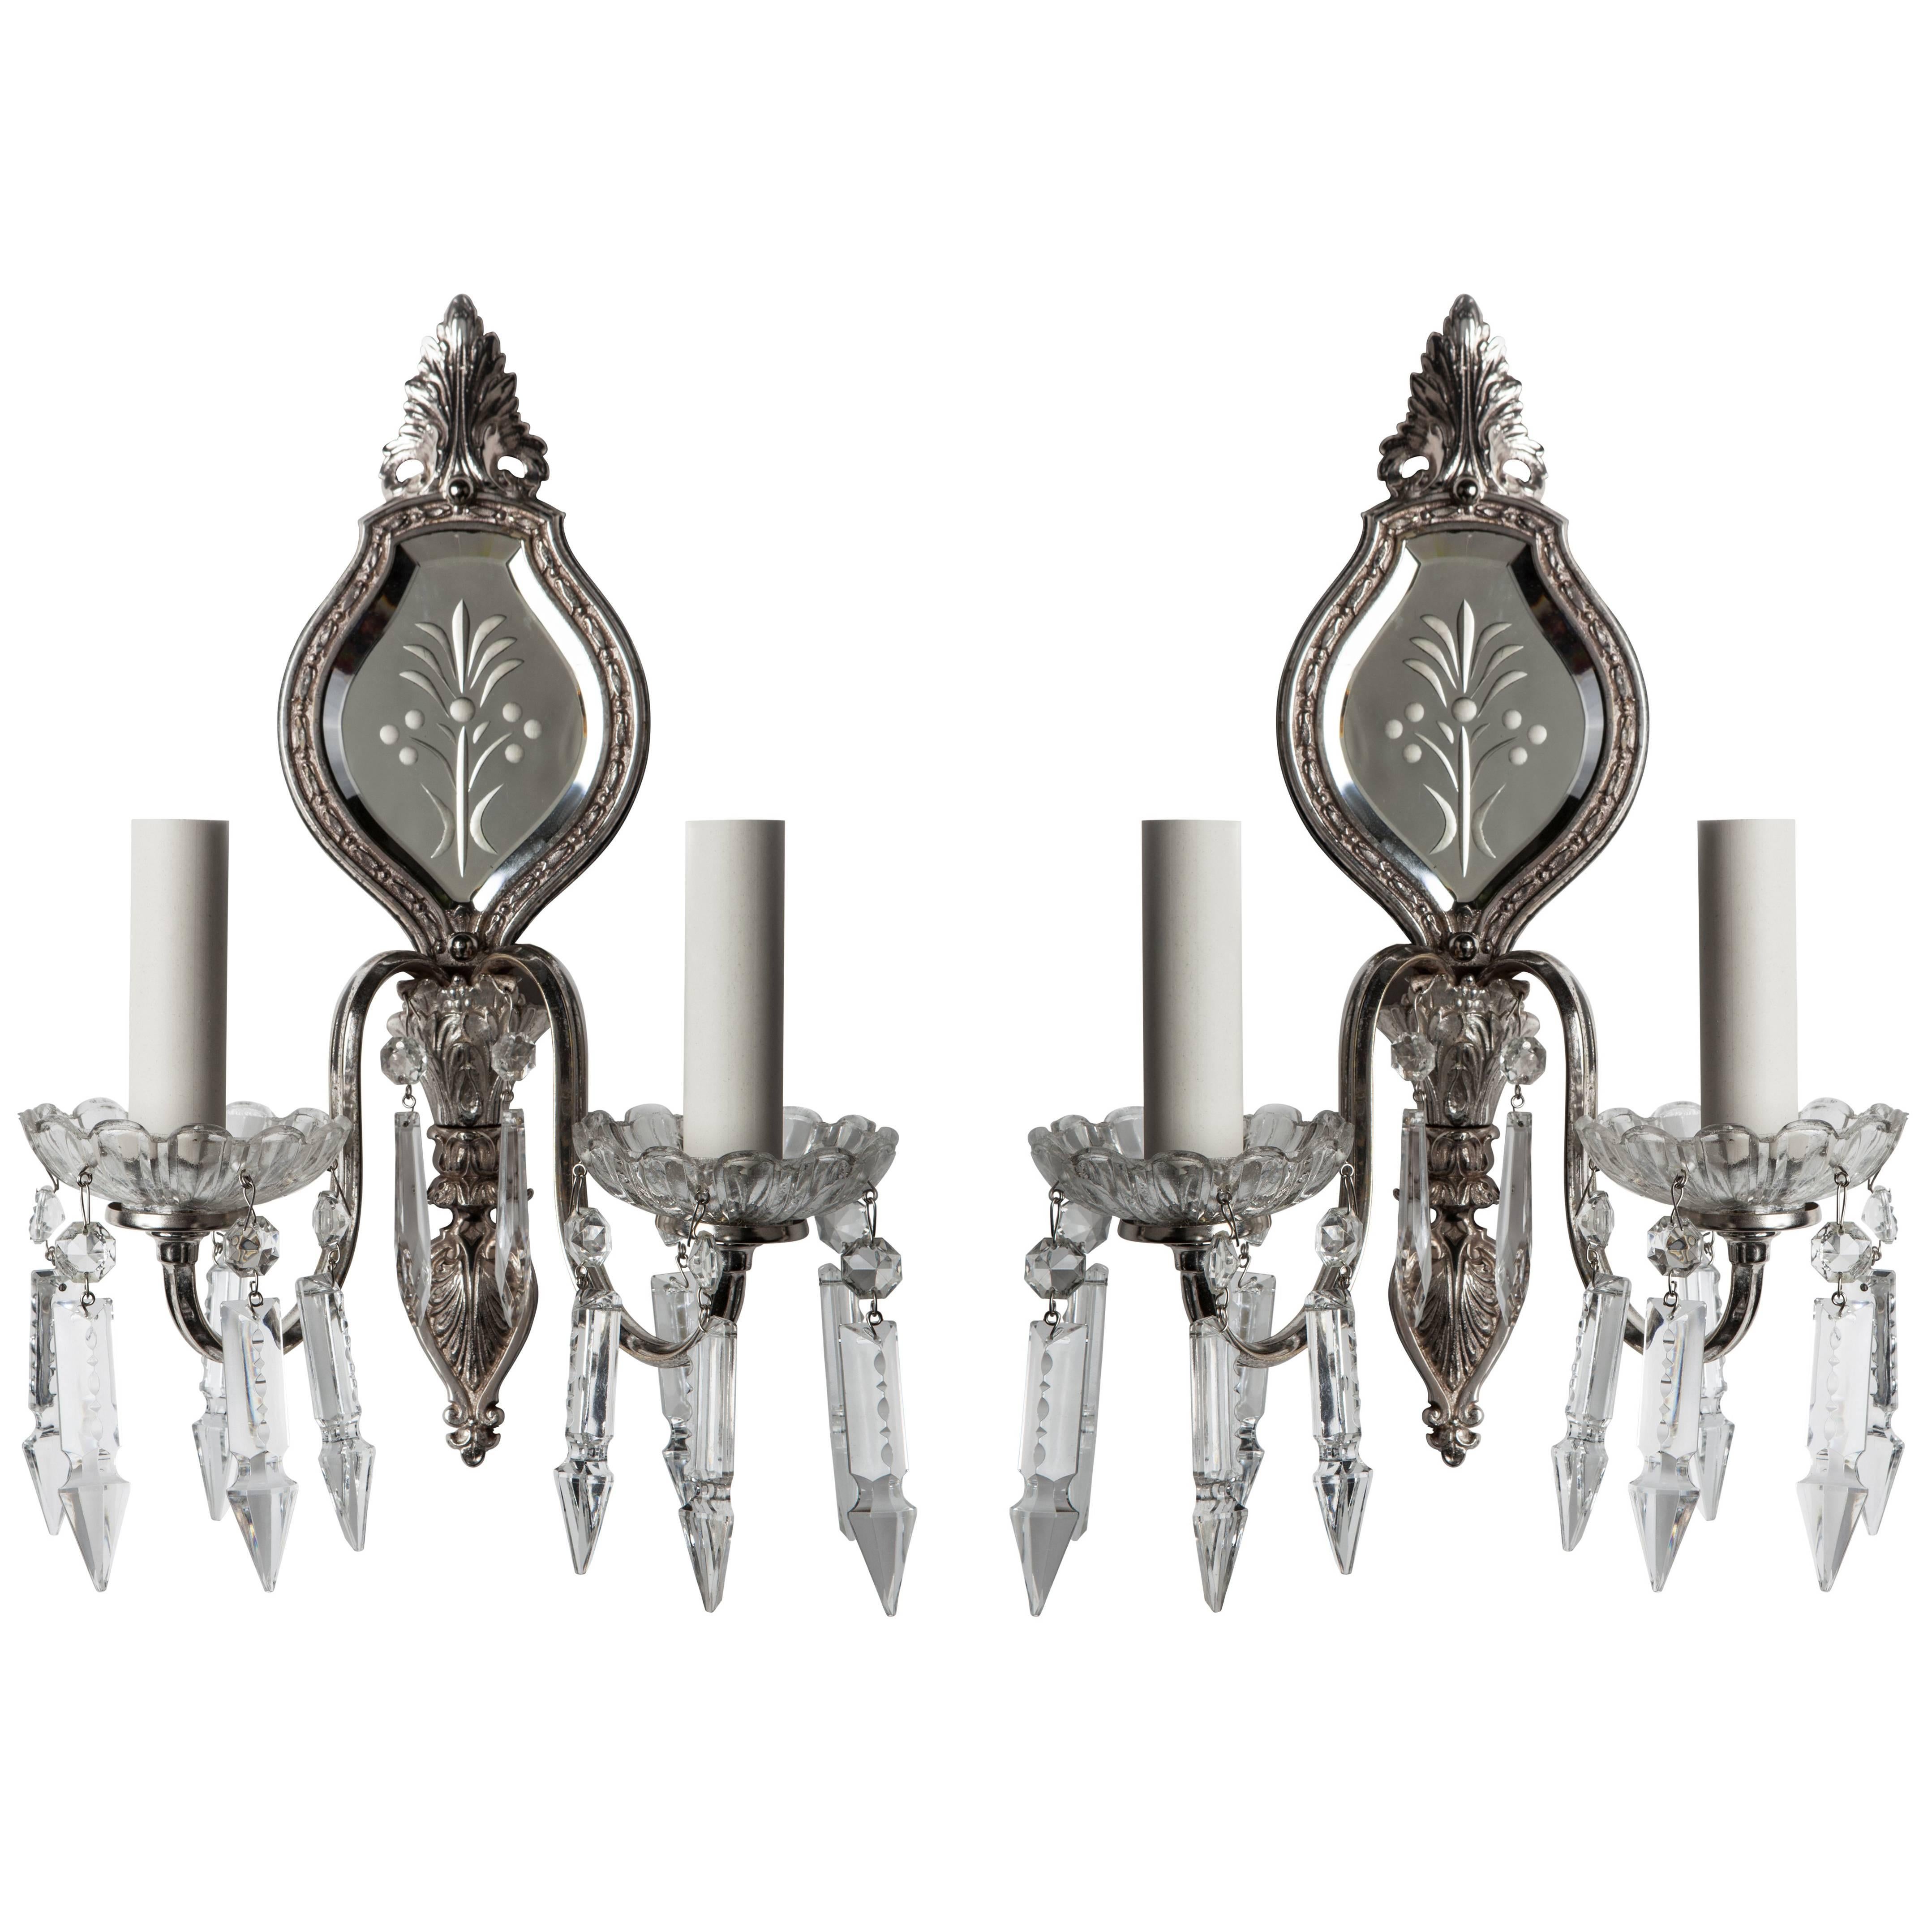 Silverplate Wheel-Cut Mirrorback Sconces with Crystal Spear Prisms, Circa 1930s For Sale